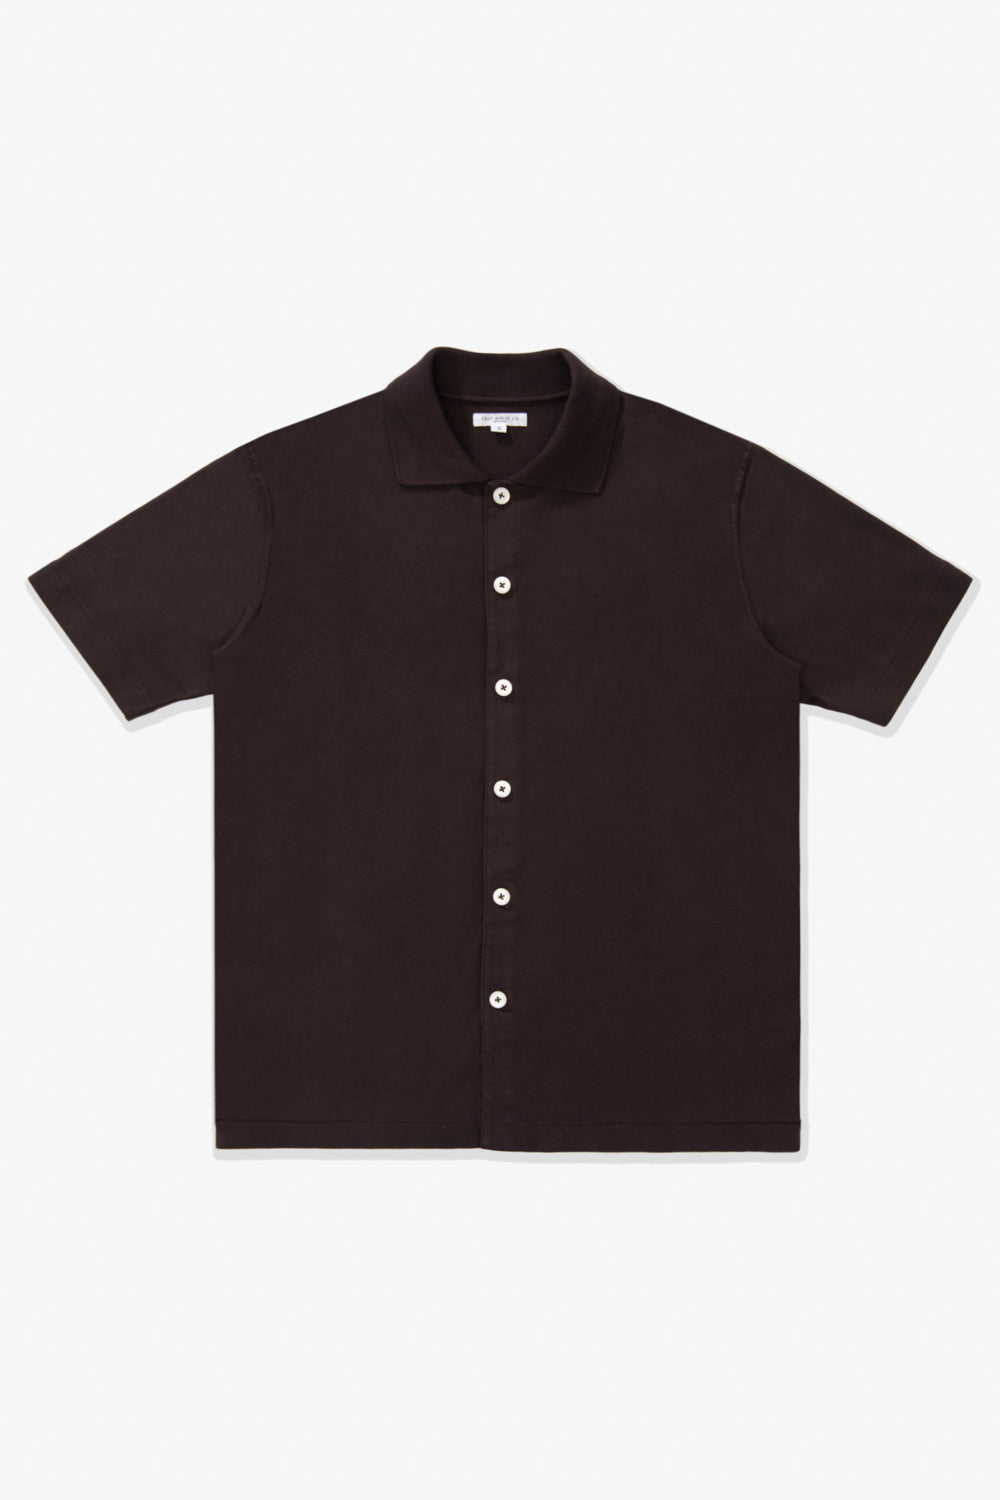 S/S PLACKET POLO - DEEP BROWN – LADY WHITE CO.